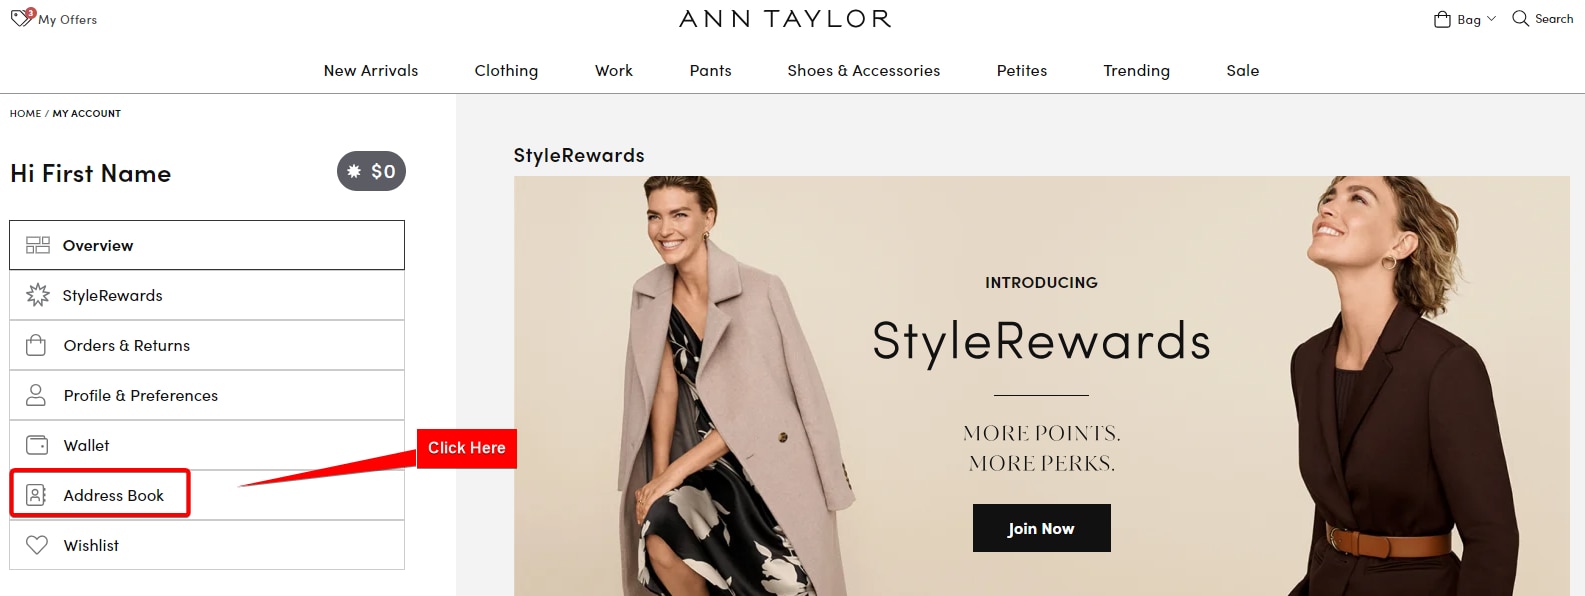 How to Ship Ann Taylor Internationally in 3 Easy Steps 2